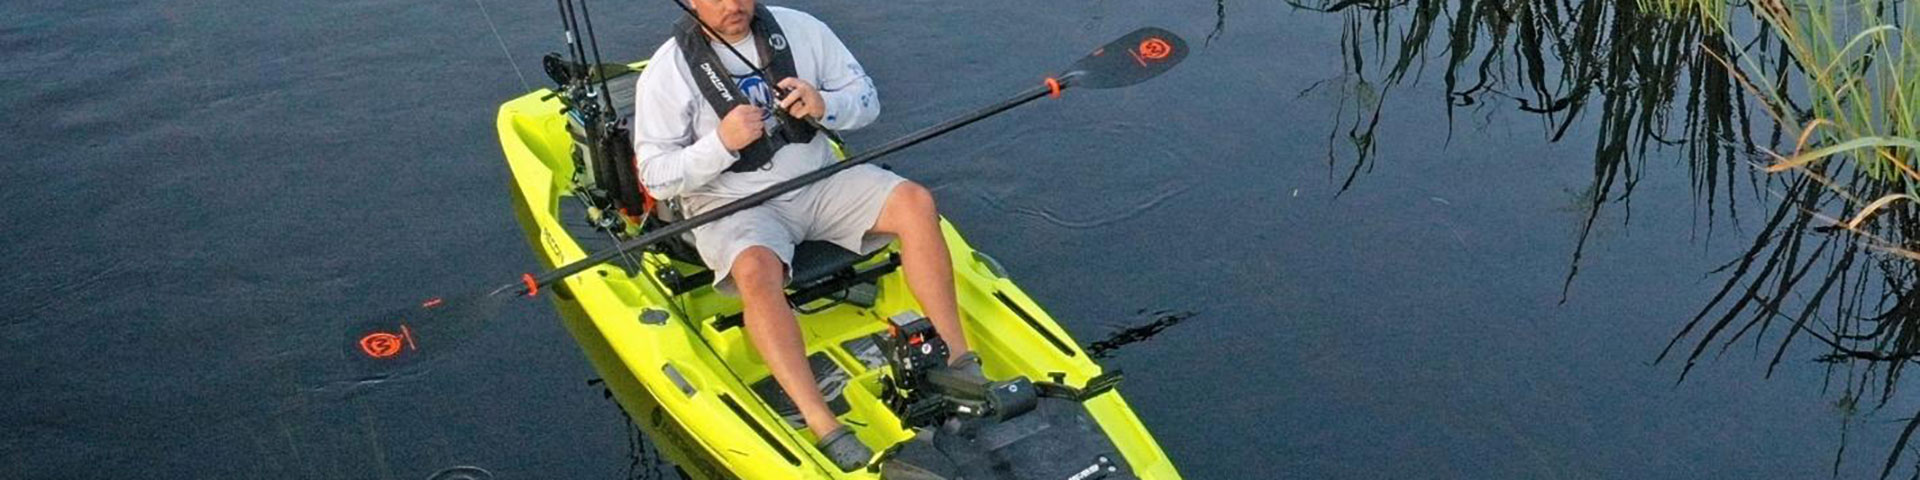 Man fishing in Wilderness Systems Recon 120 HD kayak